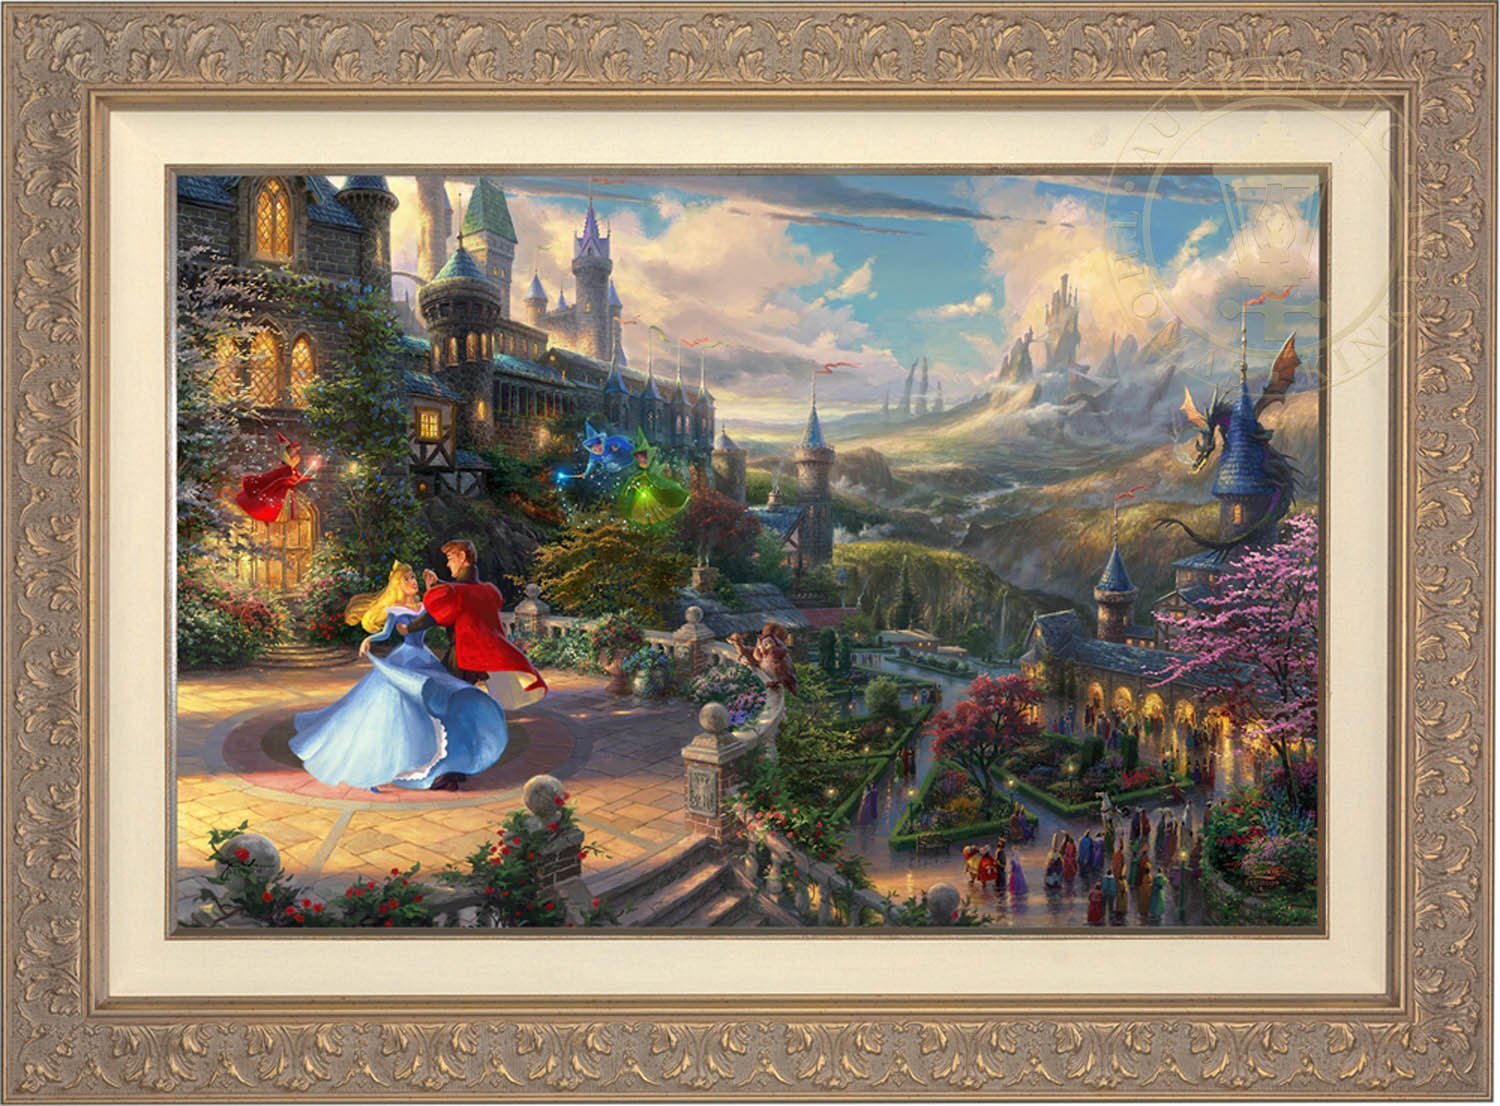 Prince Phillip has awakened Princess Aurora with true love’s kiss, dancing in courtyard under an enchanted light streaming down from the good fairies - Carrisa Frame